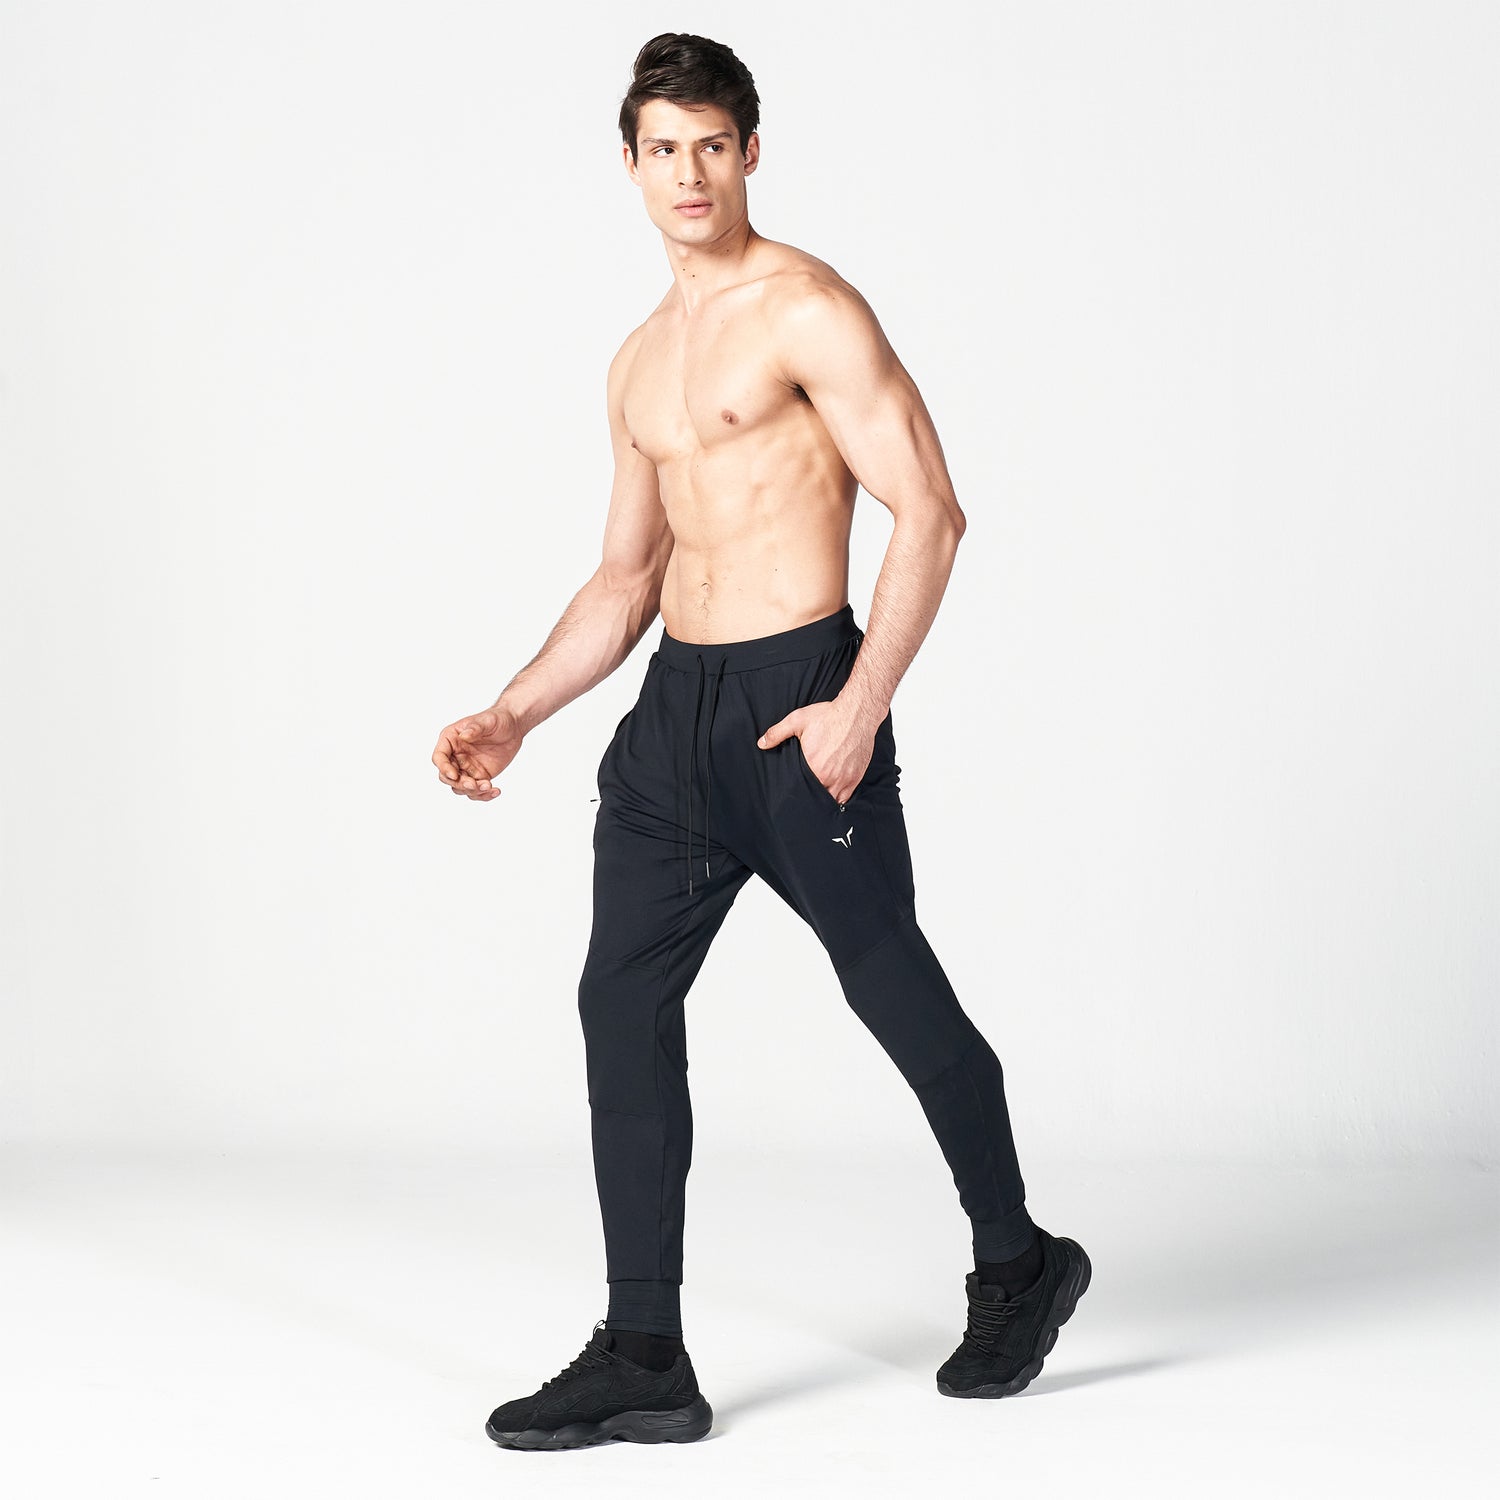 squatwolf-gym-wear-statement-ribbed-joggers-reimagined-black-workout-pants-for-men